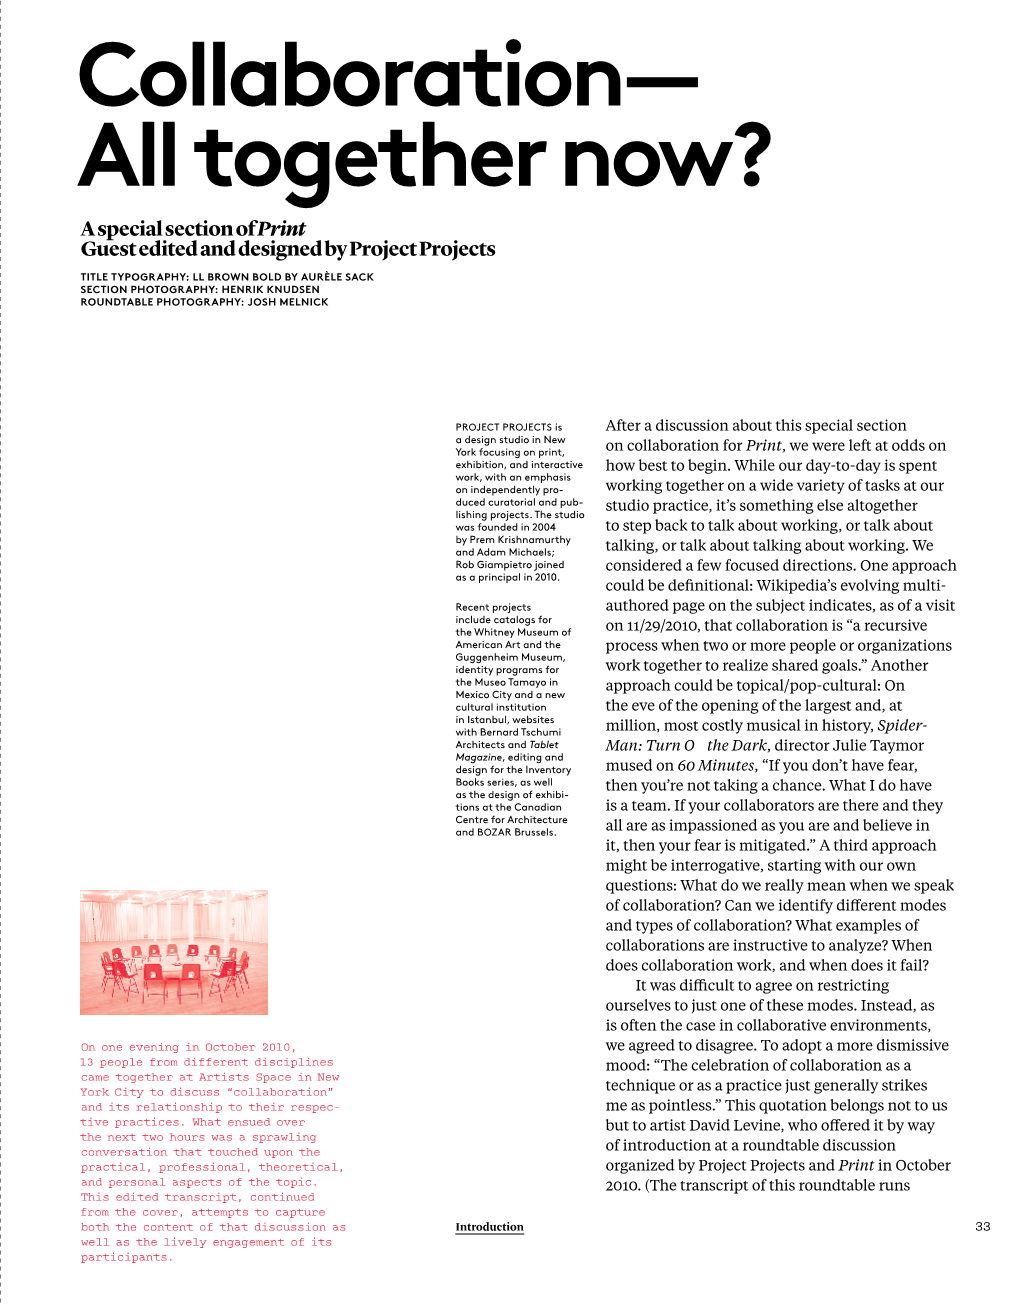 Collaboration— All Together Now? a Special Section of Print Guest Edited and Designed by Project Projects